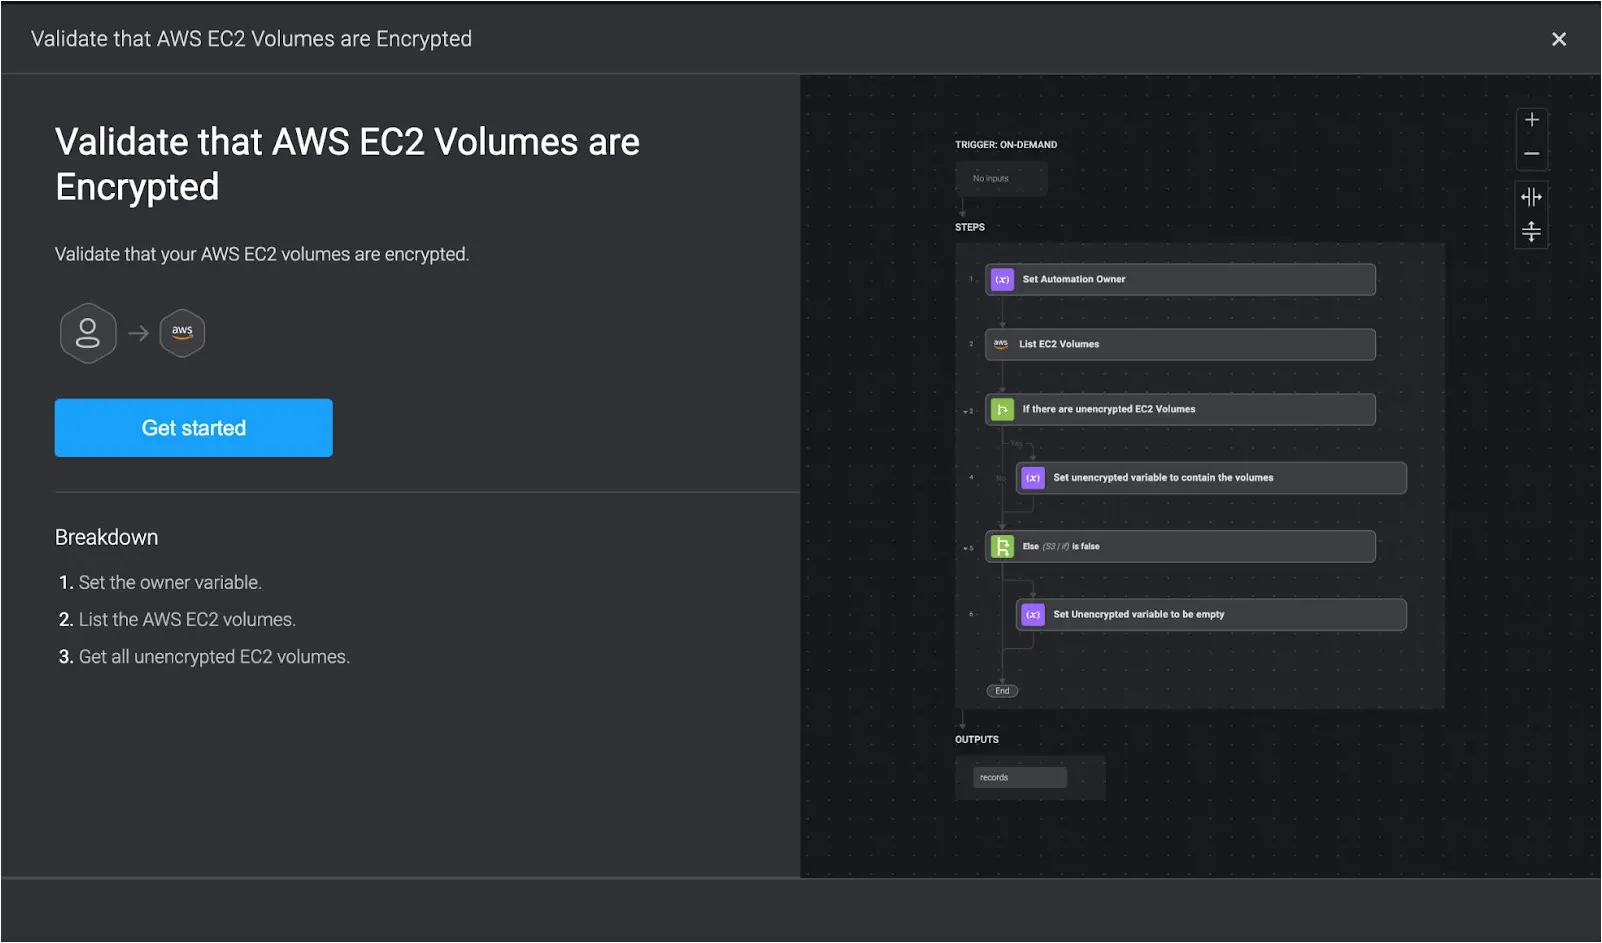 Blink automated workflow: Validate that AWS EC2 volumes are encrypted.